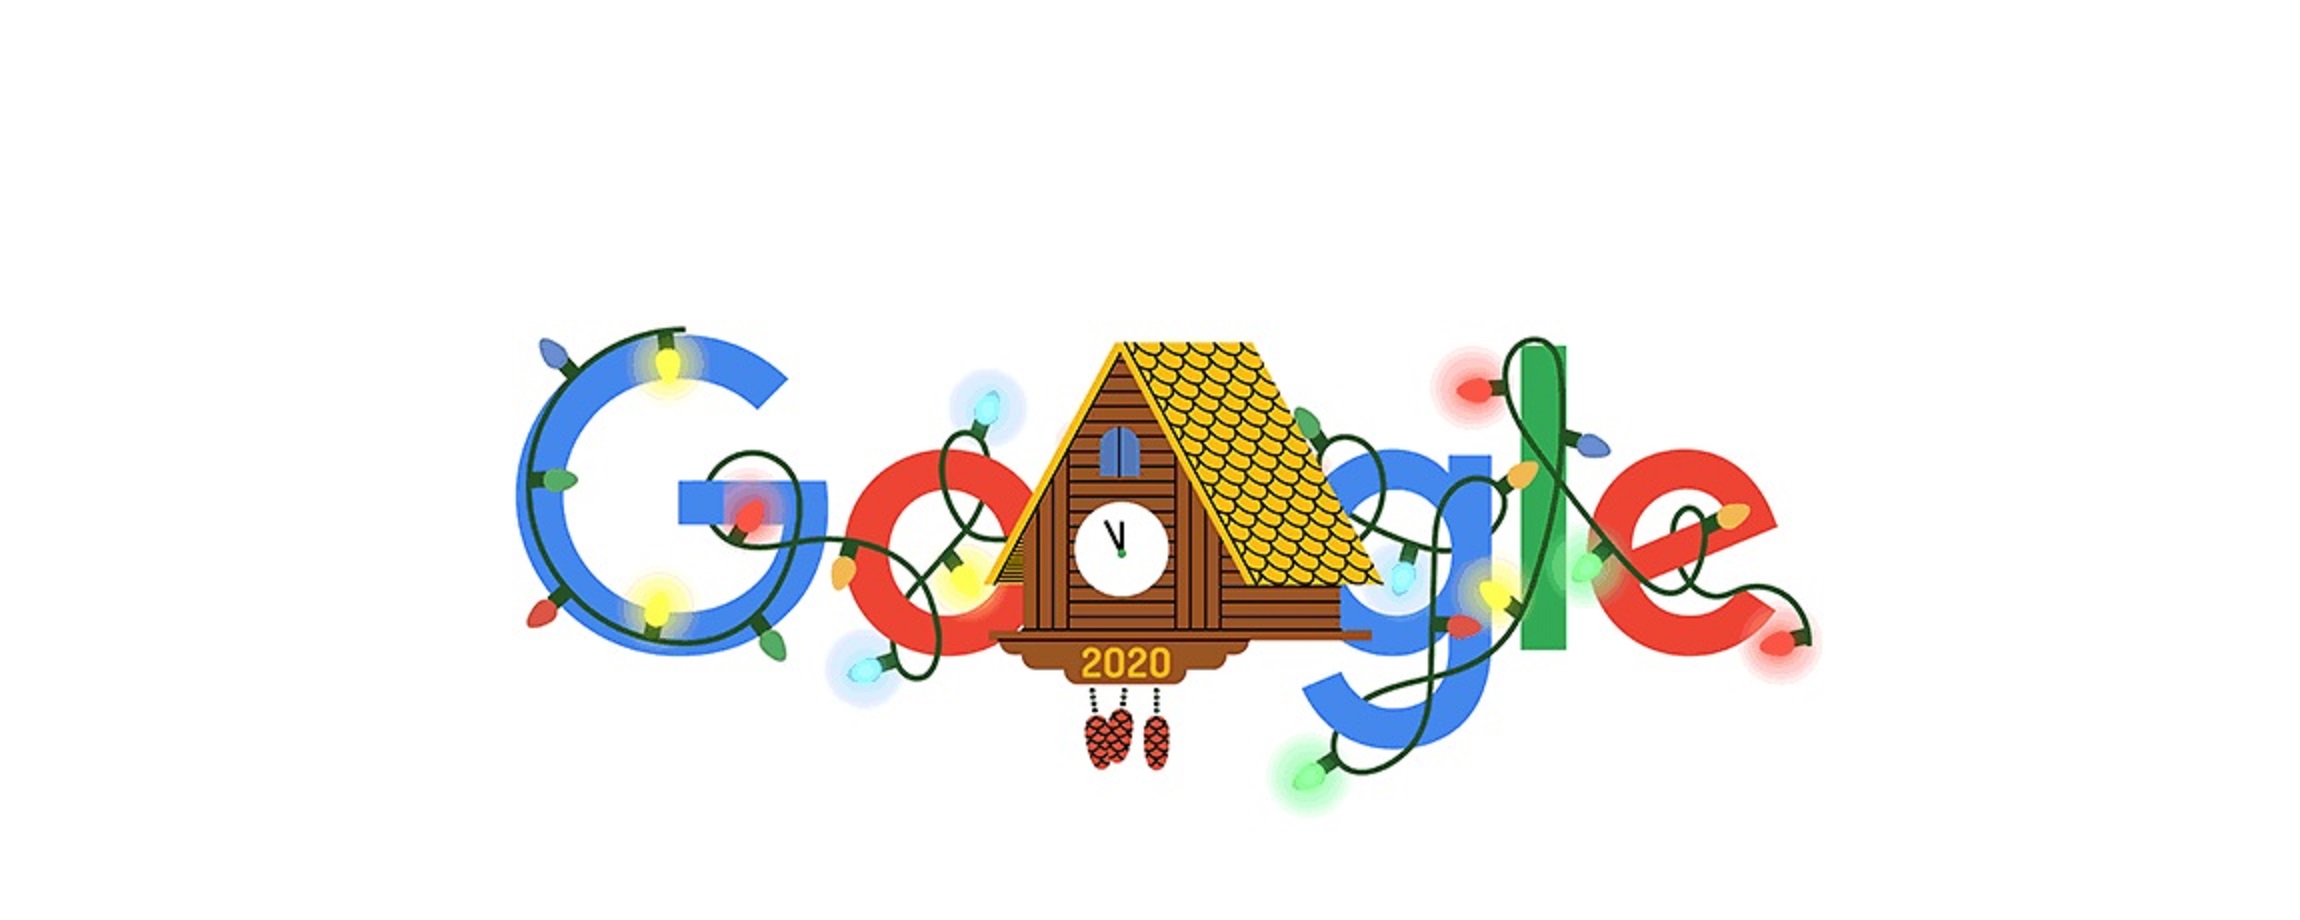 google doodle meaning